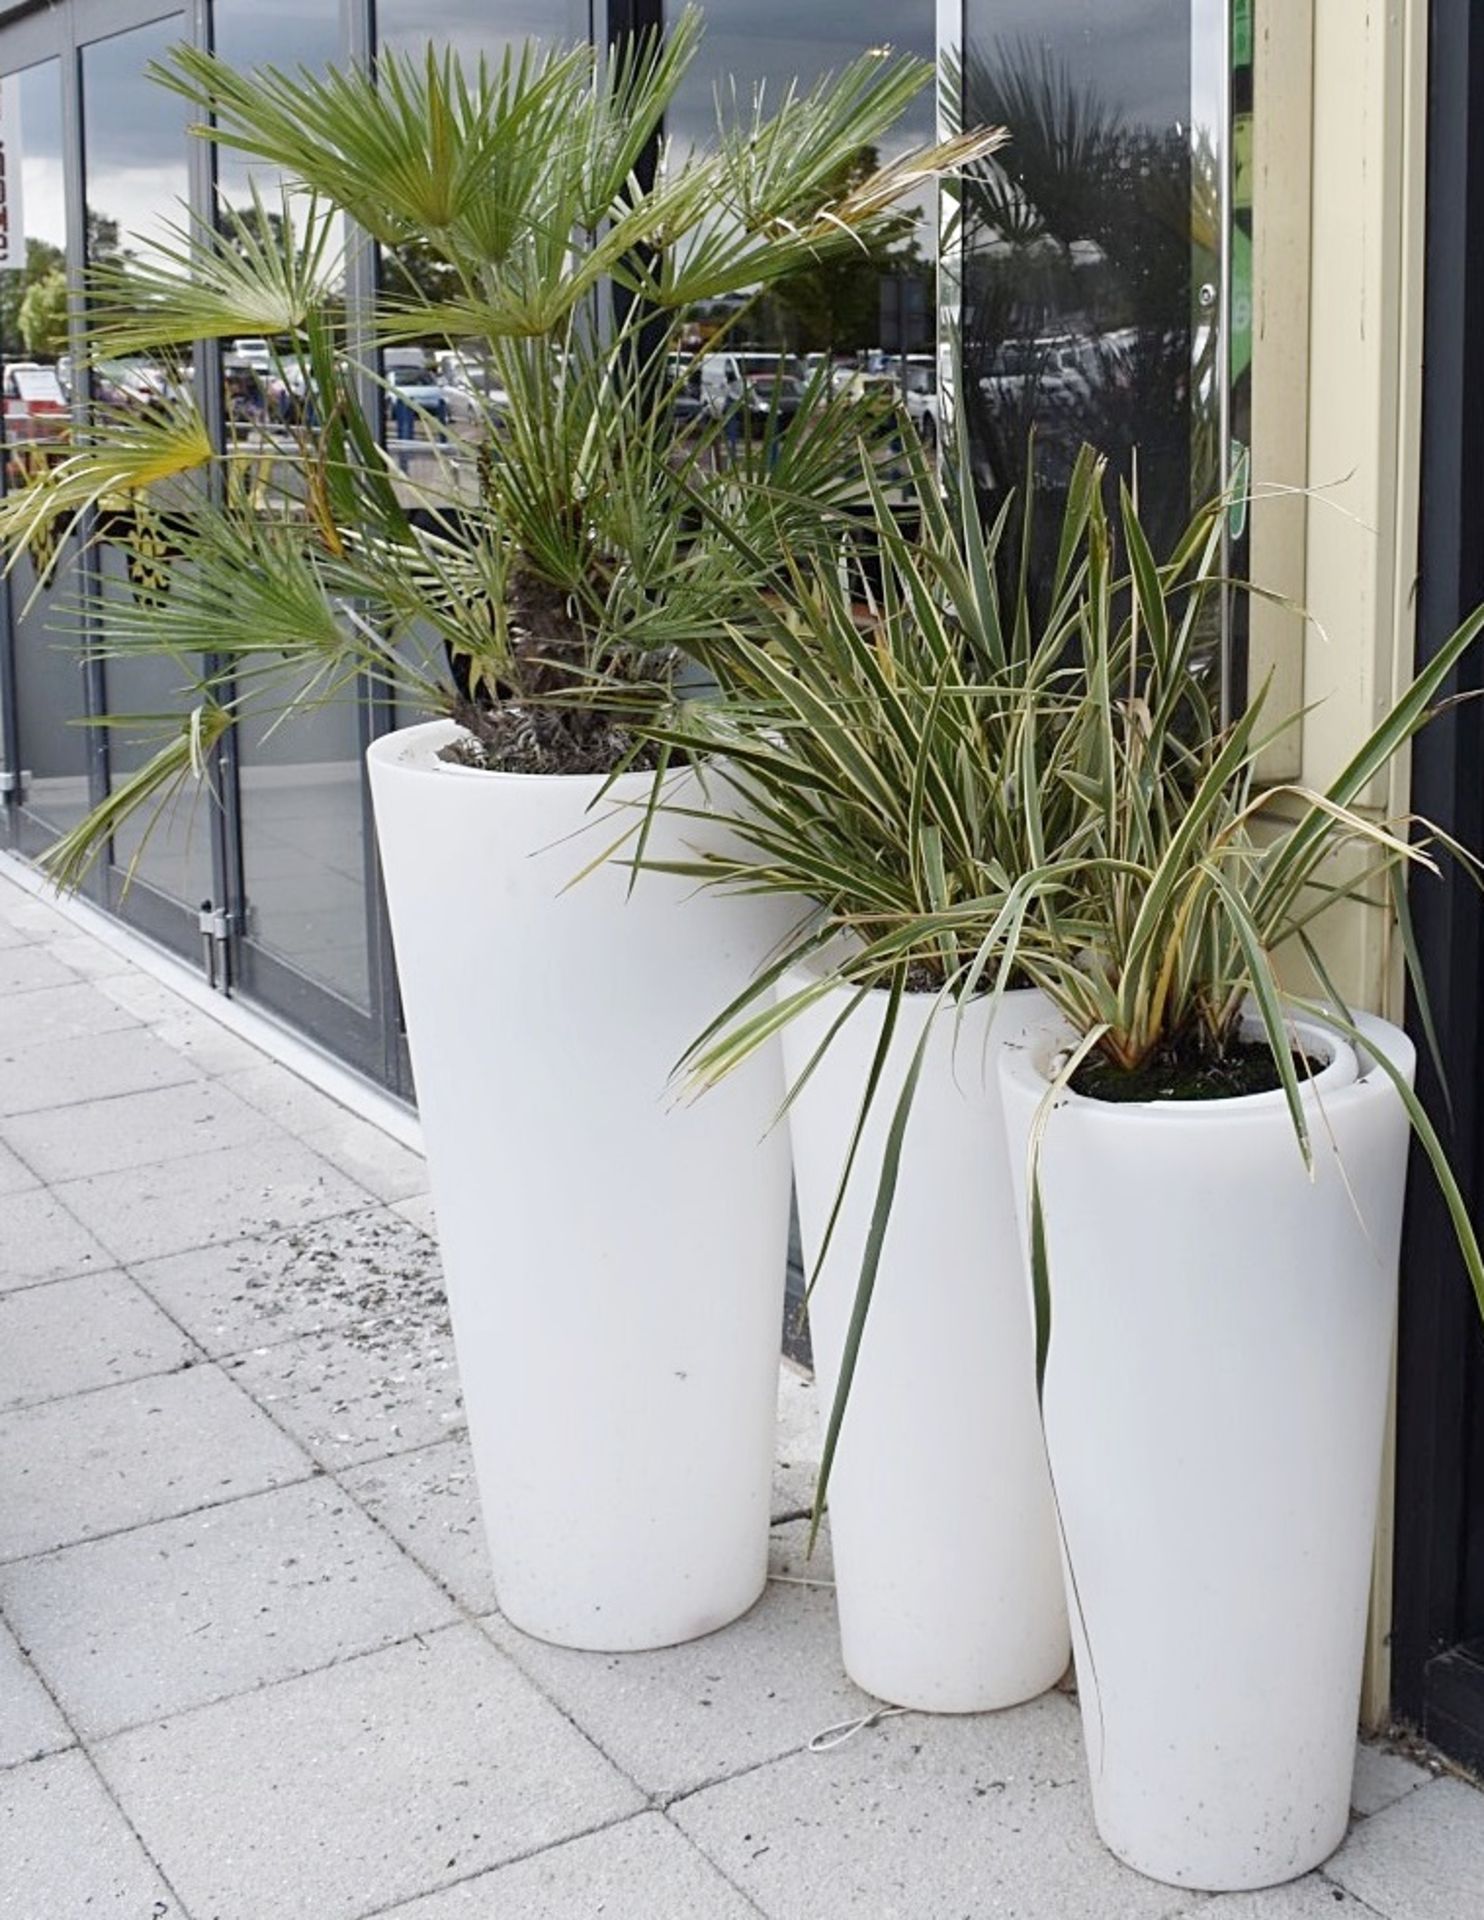 6 x Outdoor Plants In Illuminated Planters - Sizes Vary - Sizes Vary - Ref: CB OS - CL420 - Image 6 of 6